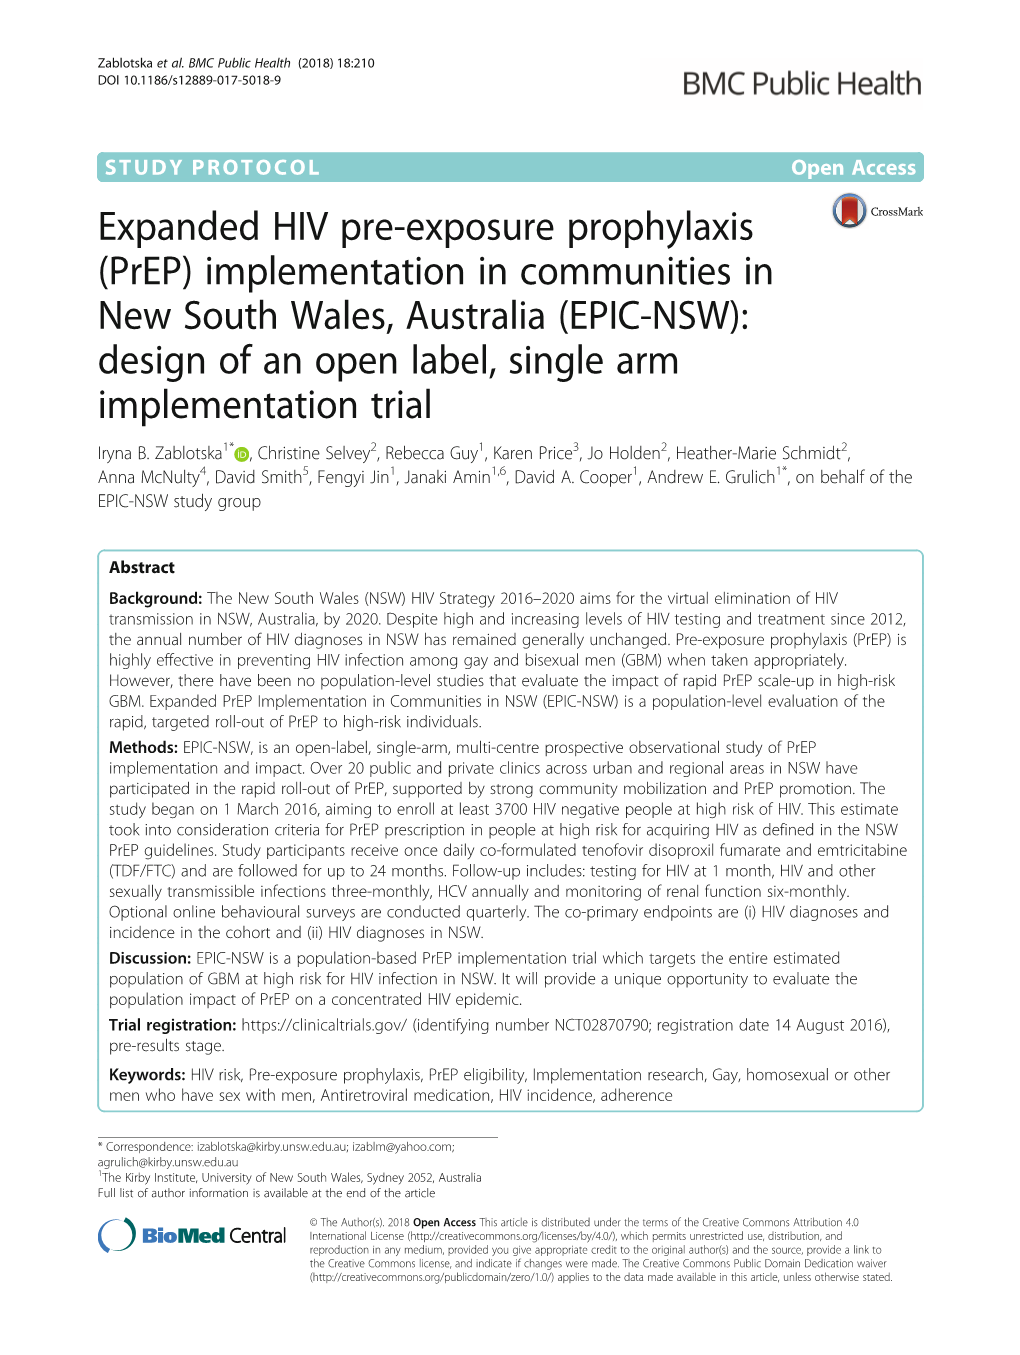 Expanded HIV Pre-Exposure Prophylaxis